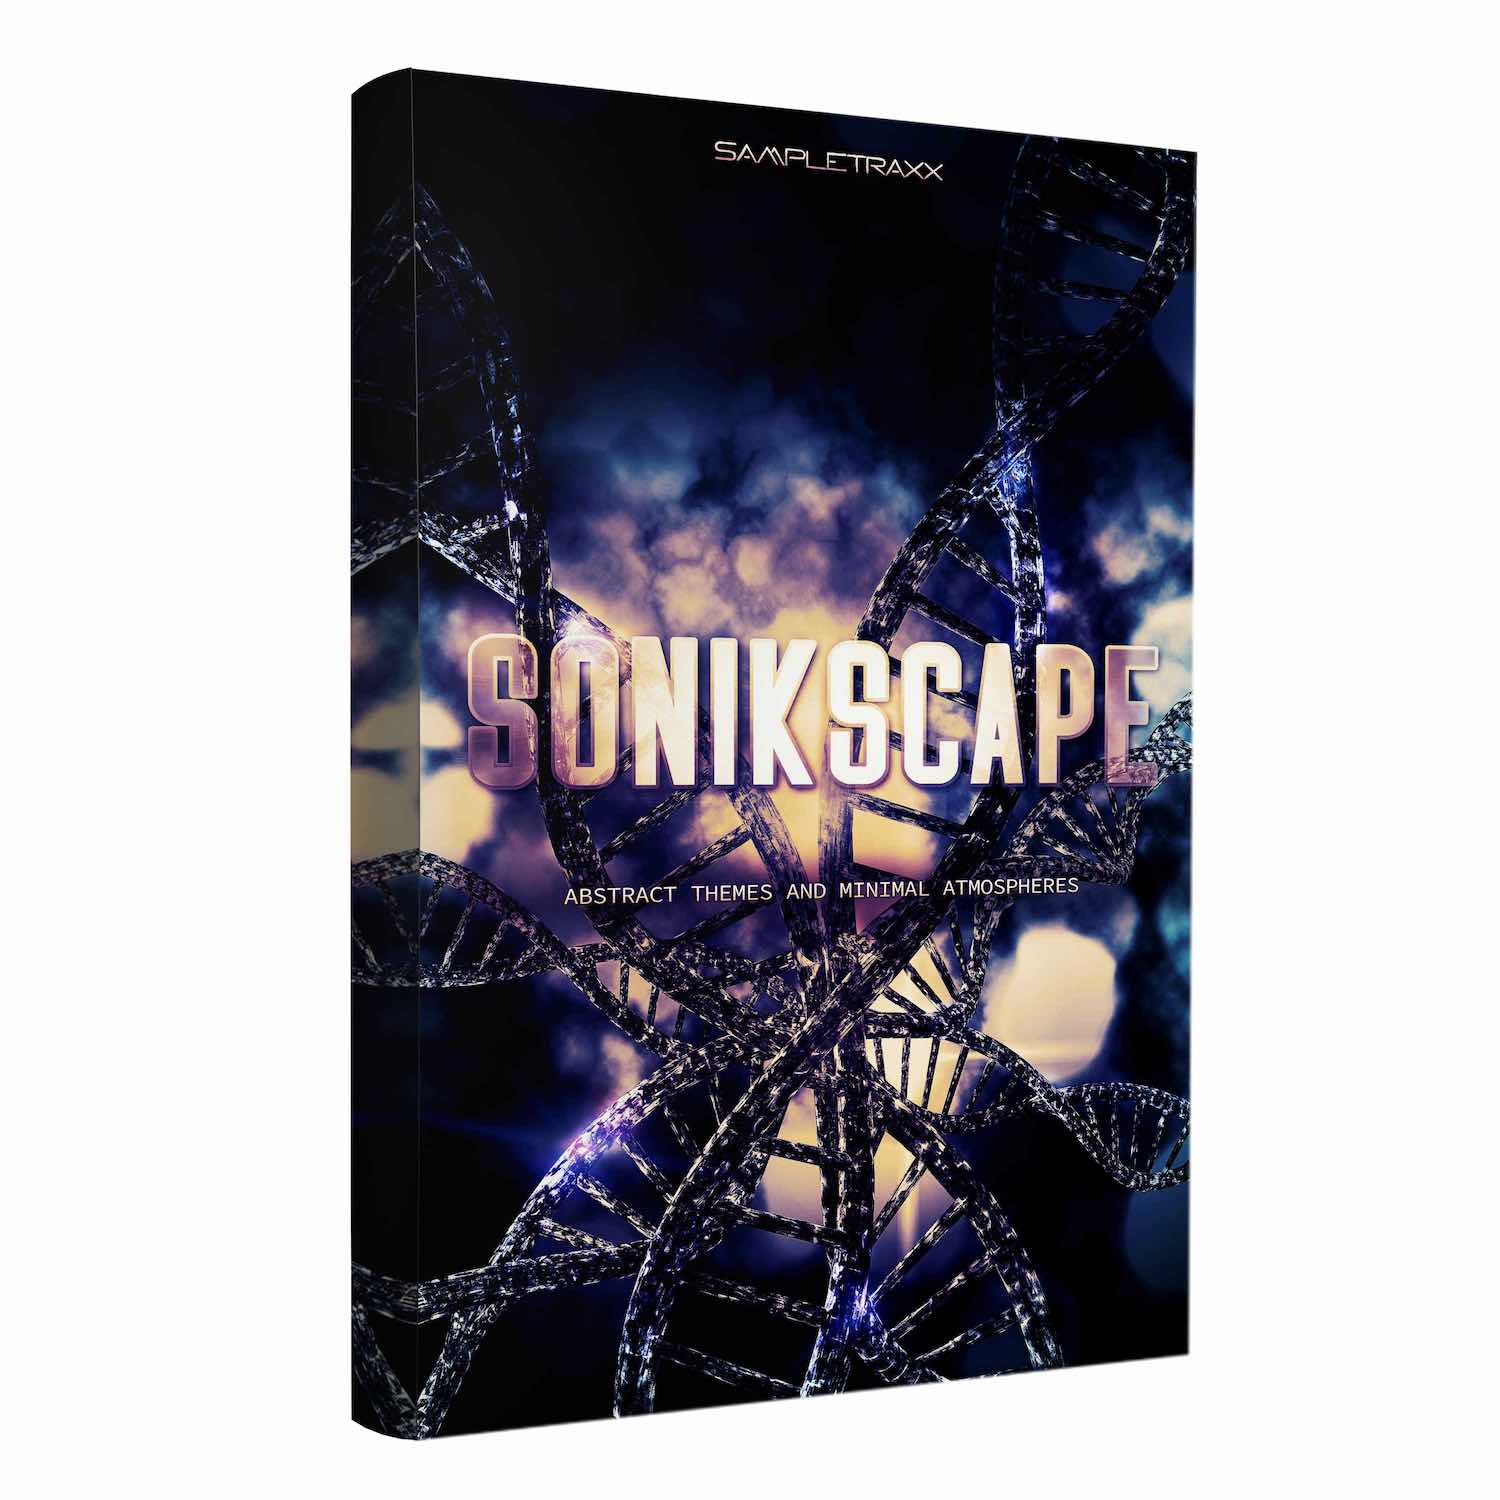 Sonikscape Review - a Dark Cinematic Atmospheres collection by SampleTraxx